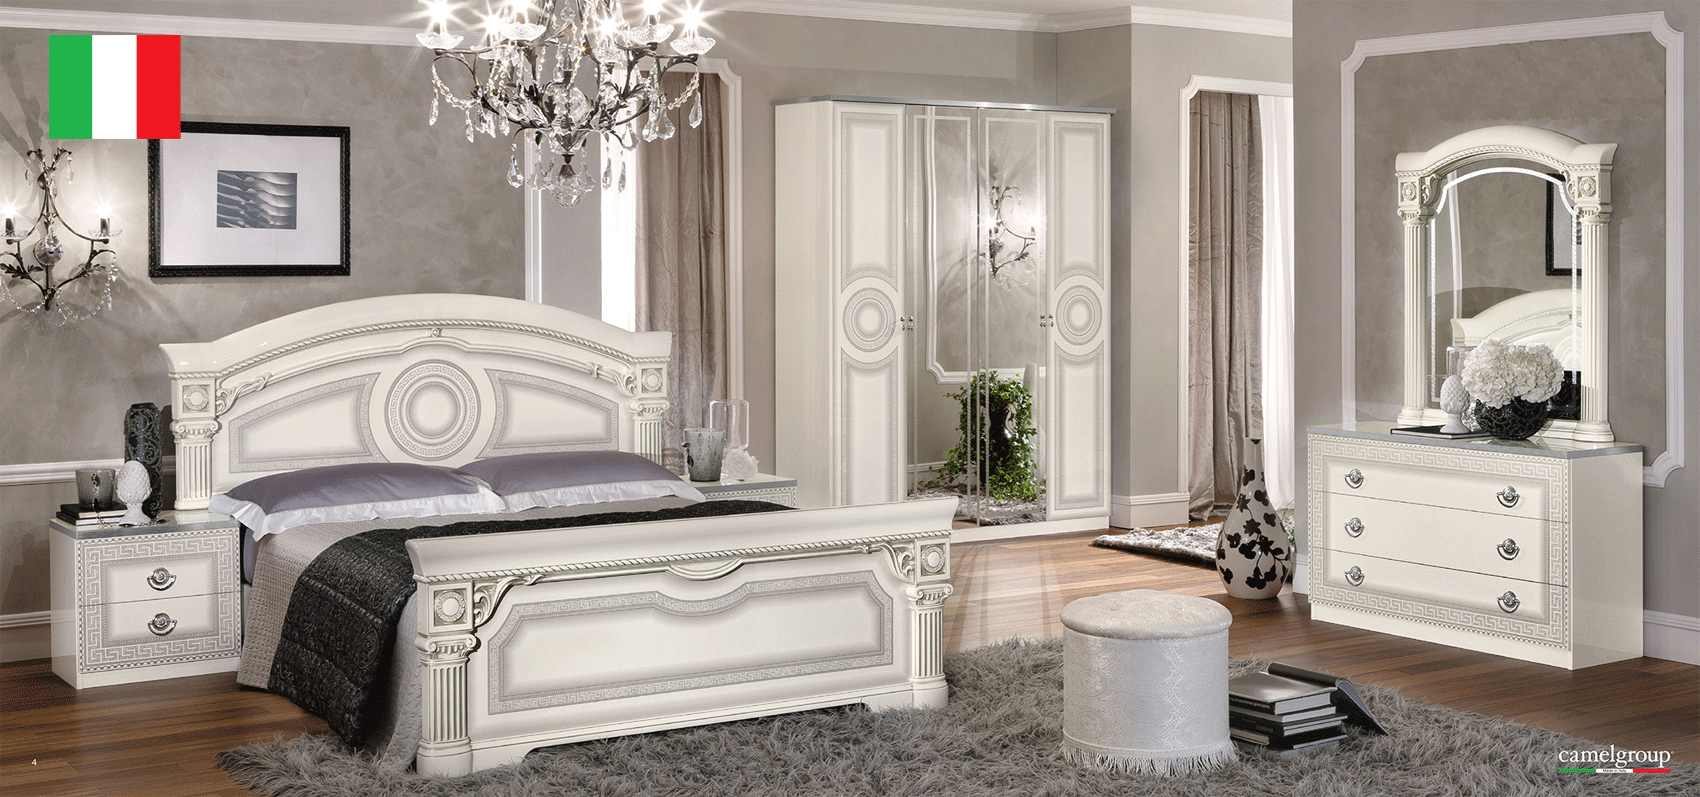 Brands Gamamobel Bedroom Sets, Spain Aida Bedroom, White w/Silver, Camelgroup Italy